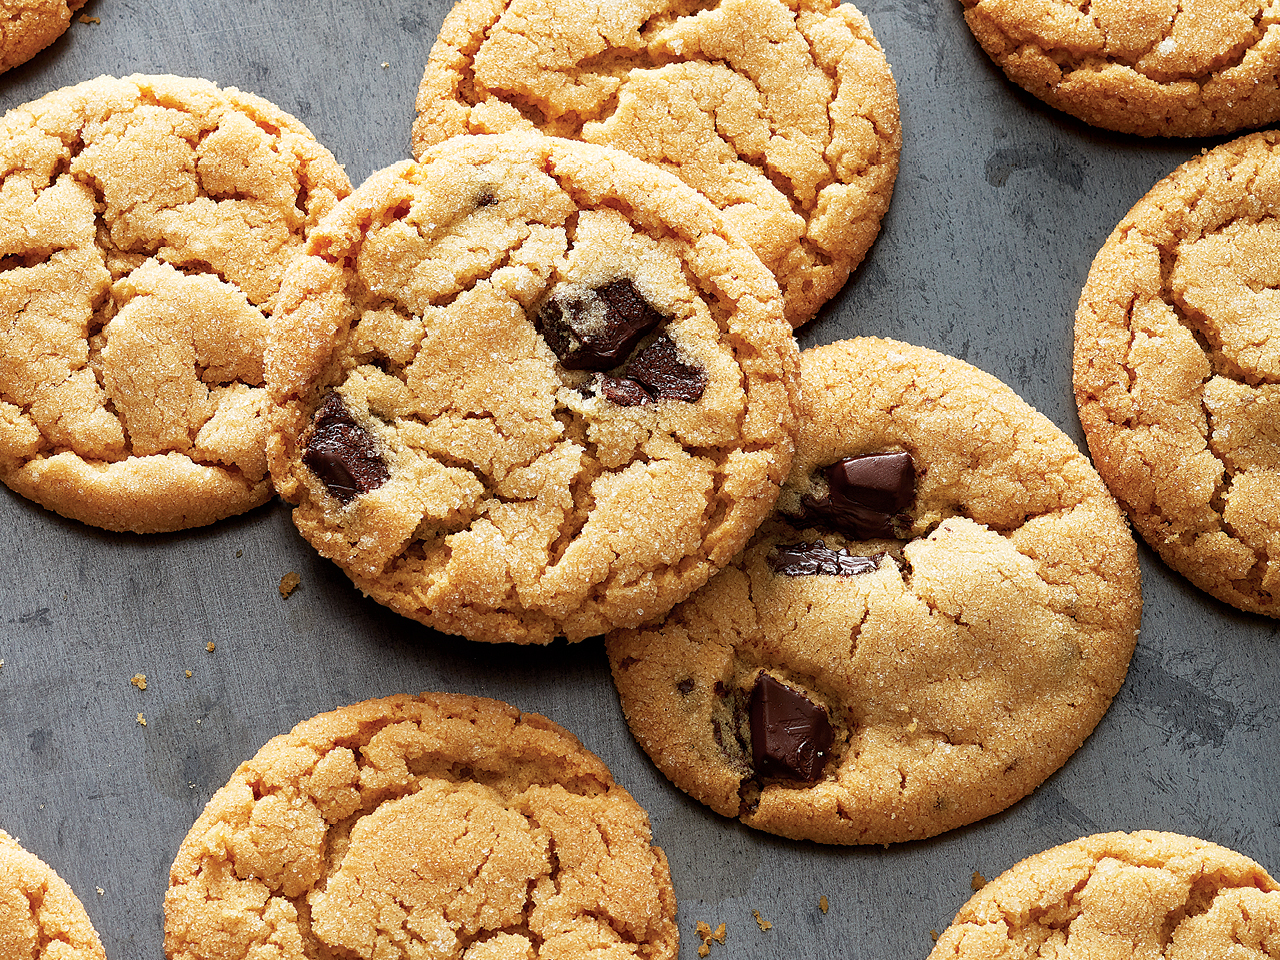 Classic Peanut Butter Chocolate Chip Cookies